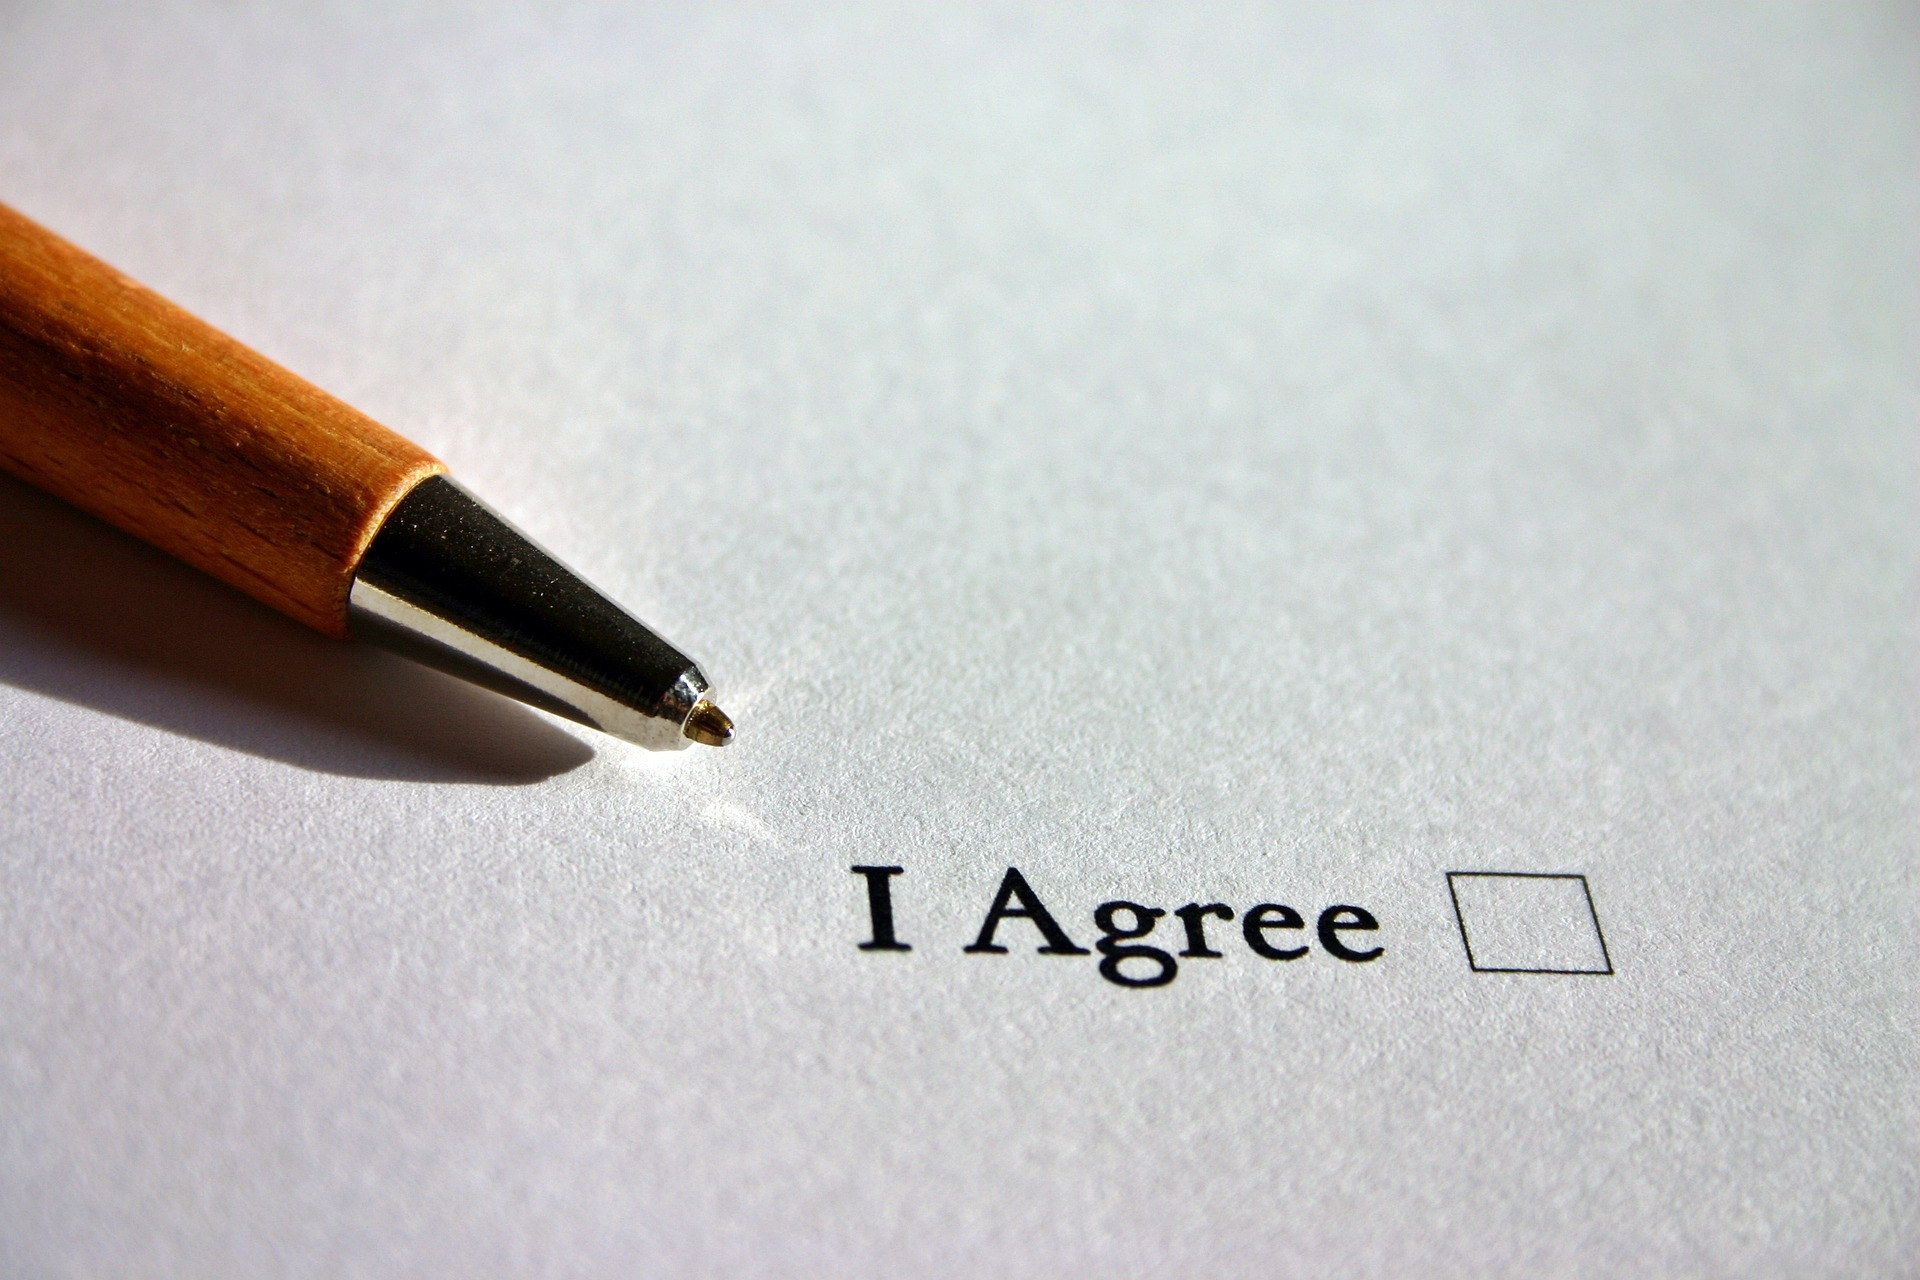 An "I Agree" checkbox written on paper with a pen next to it